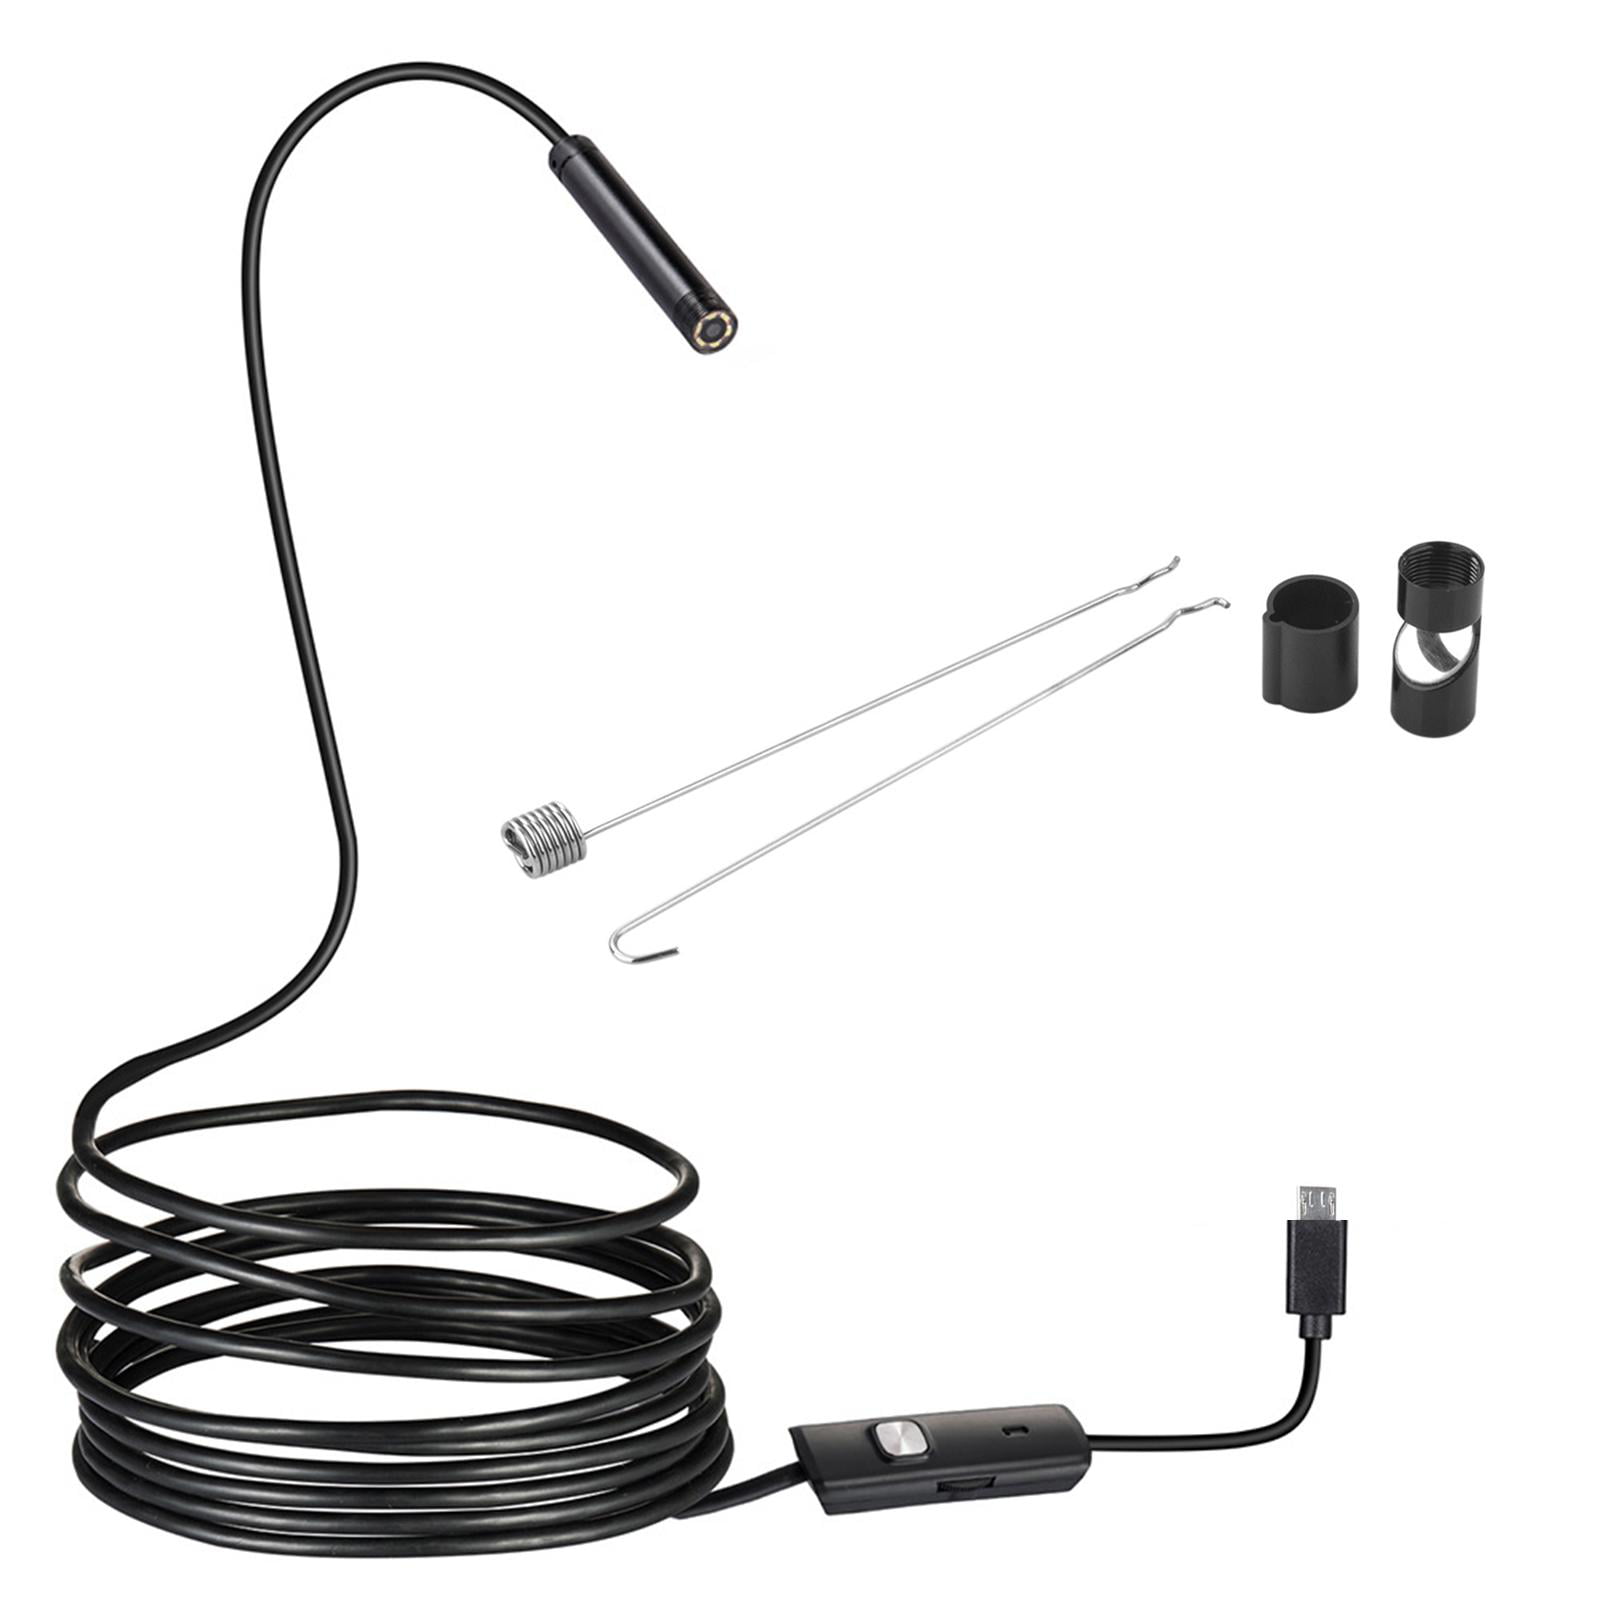 Mac Windows PC Endoscope 5.5mm Waterproof Snake HD Video Borescope with Micro USB Type-C with 6 Adjustable LED Lights for OTG Android Phone 